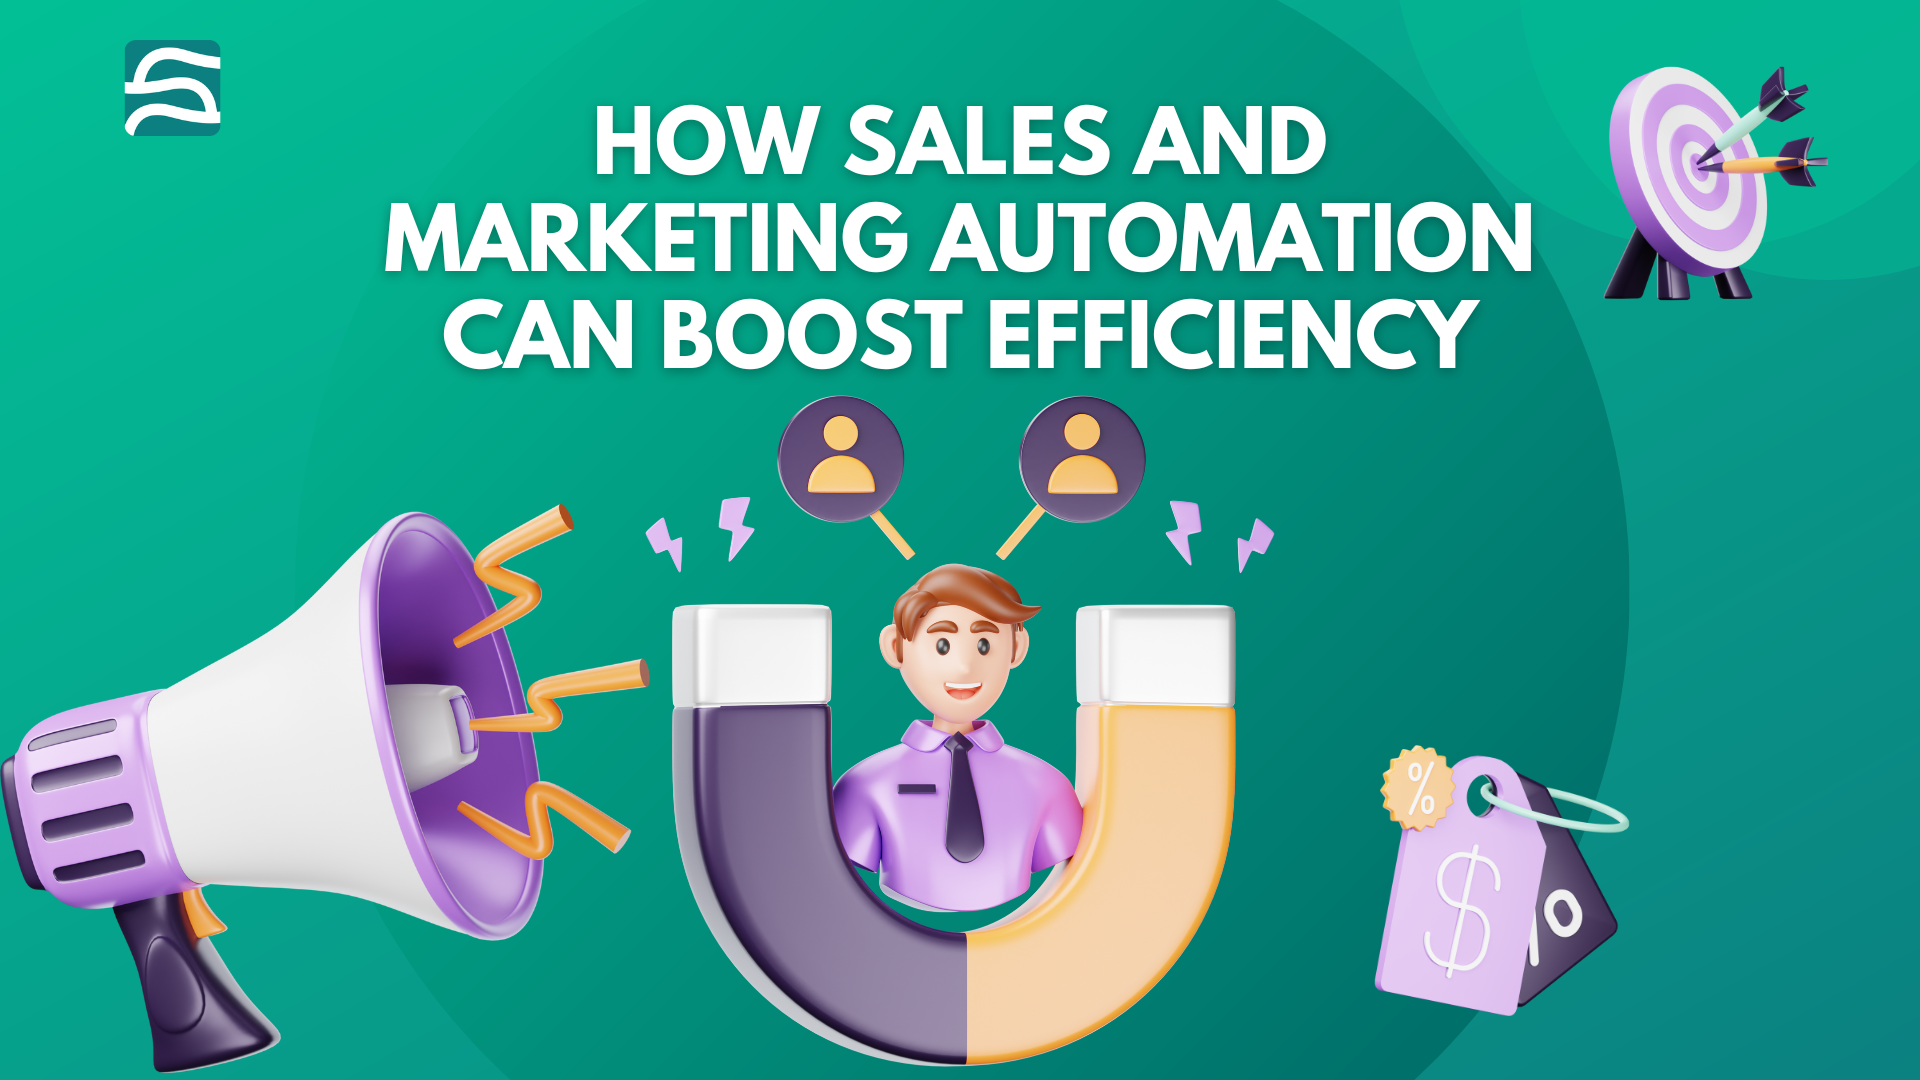 sales and marketing automation: How Sales and Marketing Automation Can Boost Efficiency